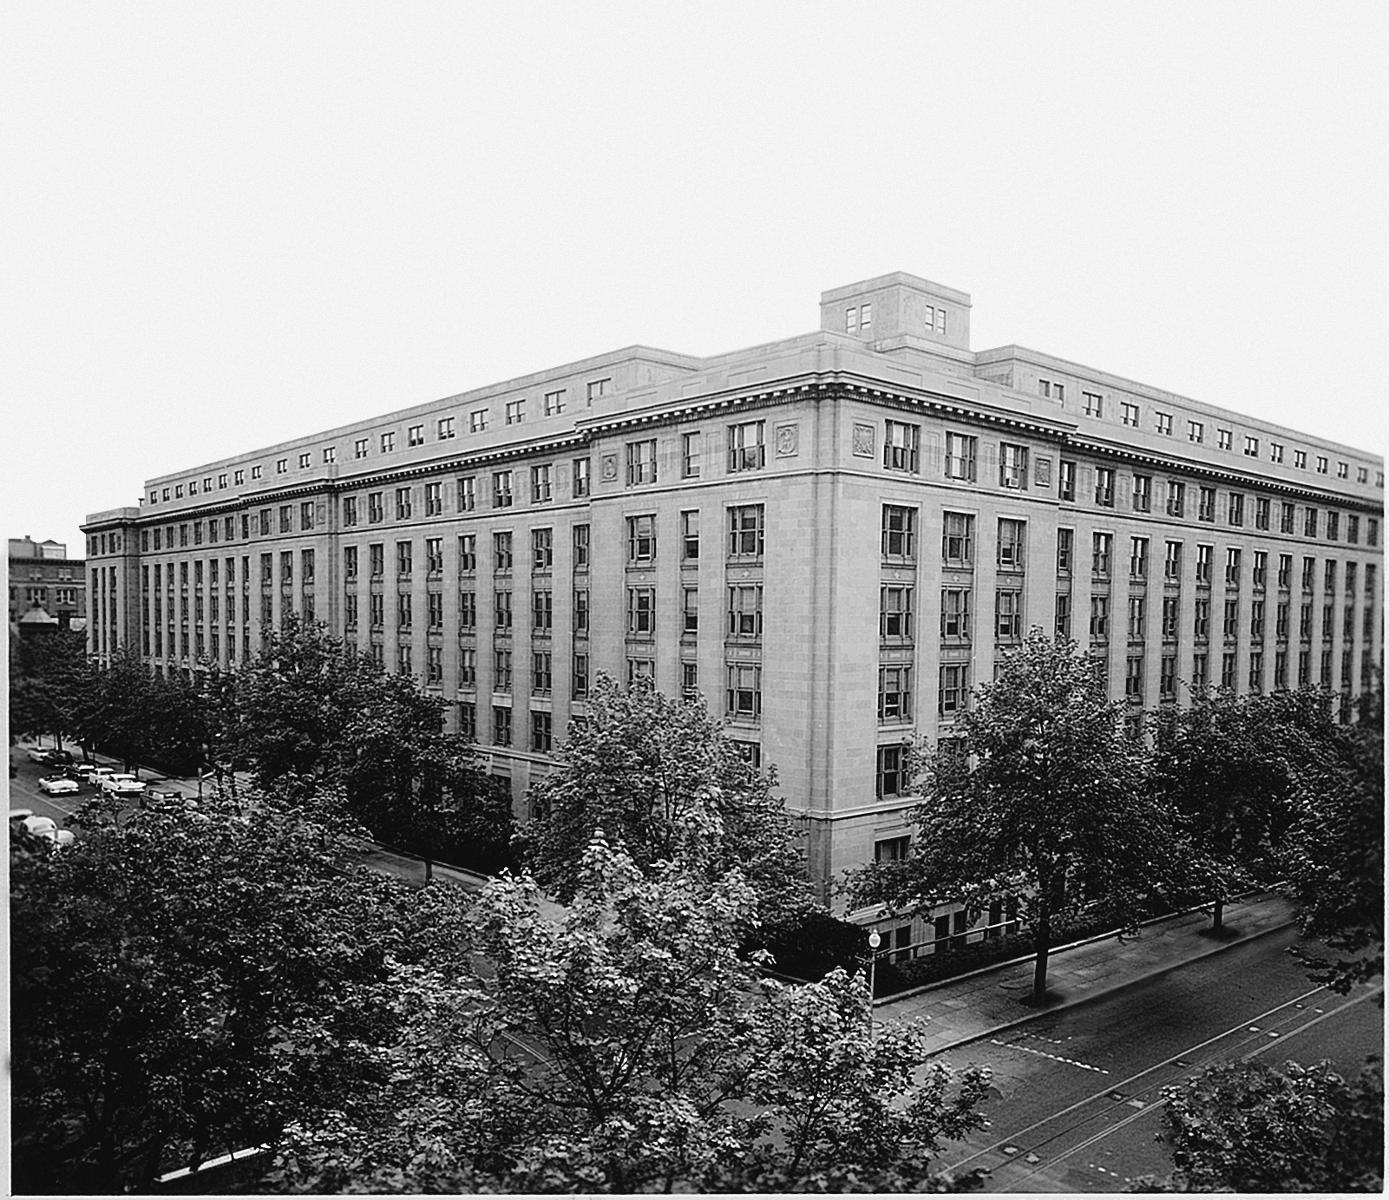 U.S. General Services Administration Building